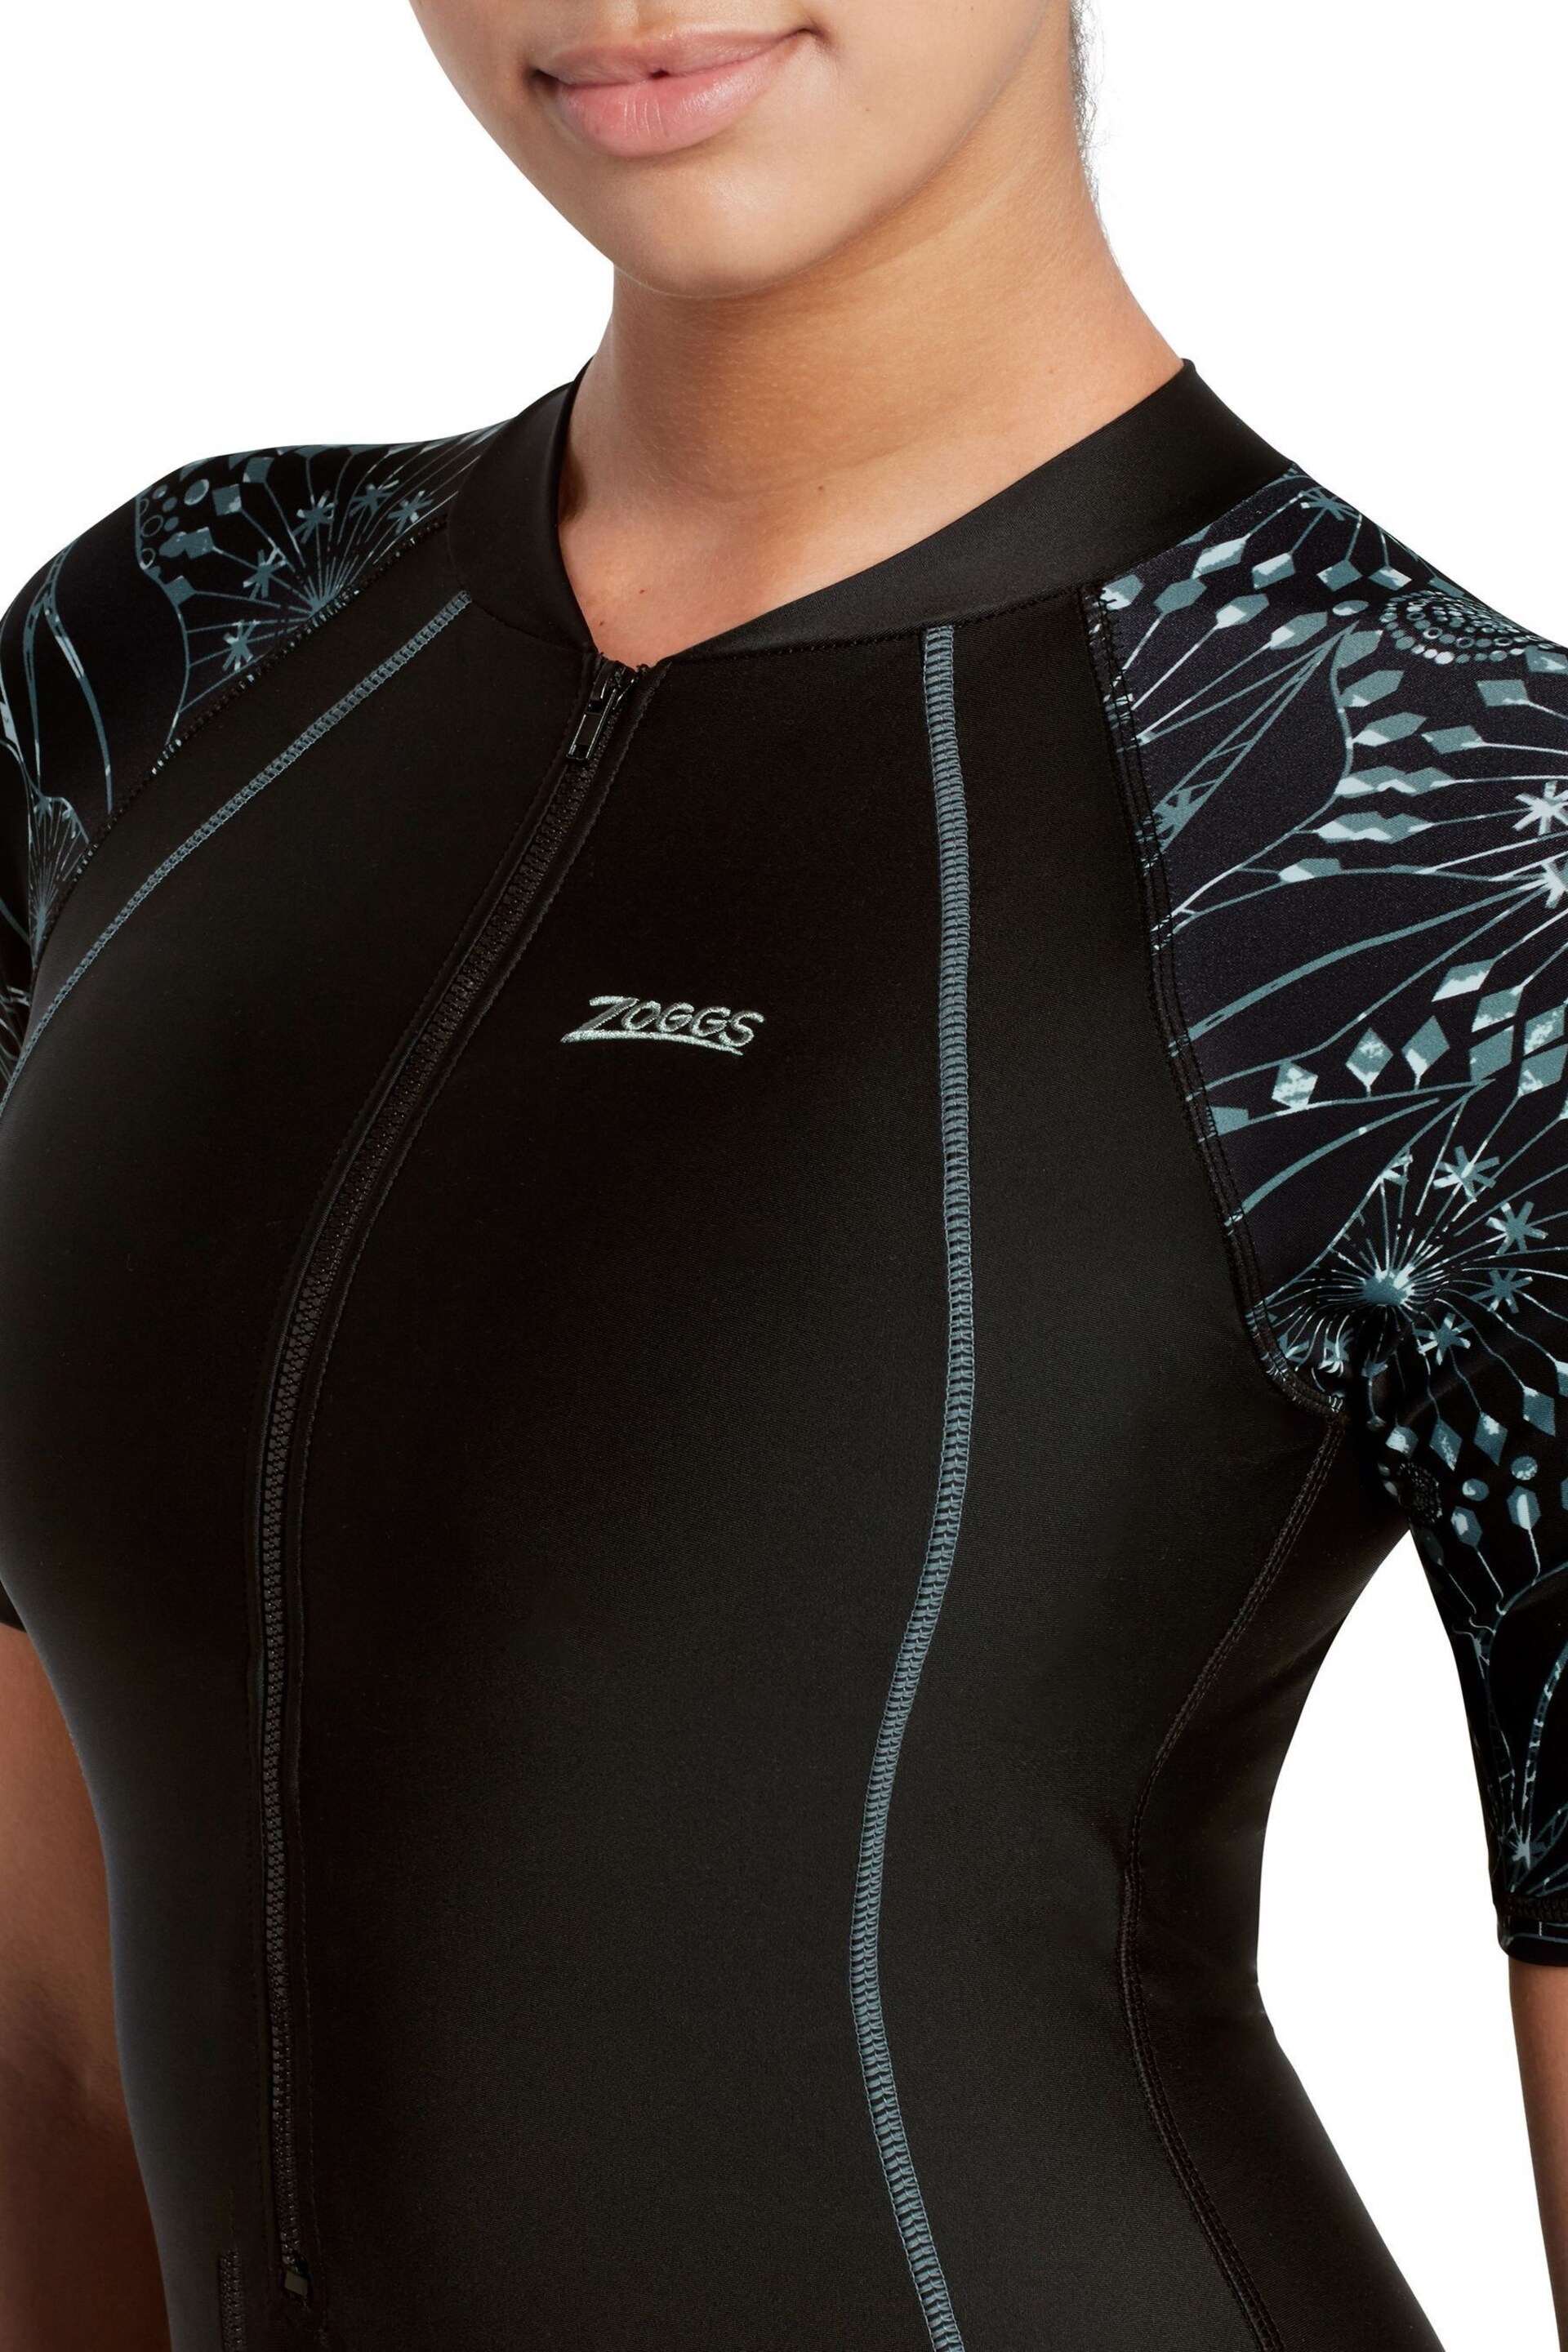 Zoggs Stellar UPF50+ Kneesuit Black Swimsuit With Removable Foam Cup Support - Image 4 of 6